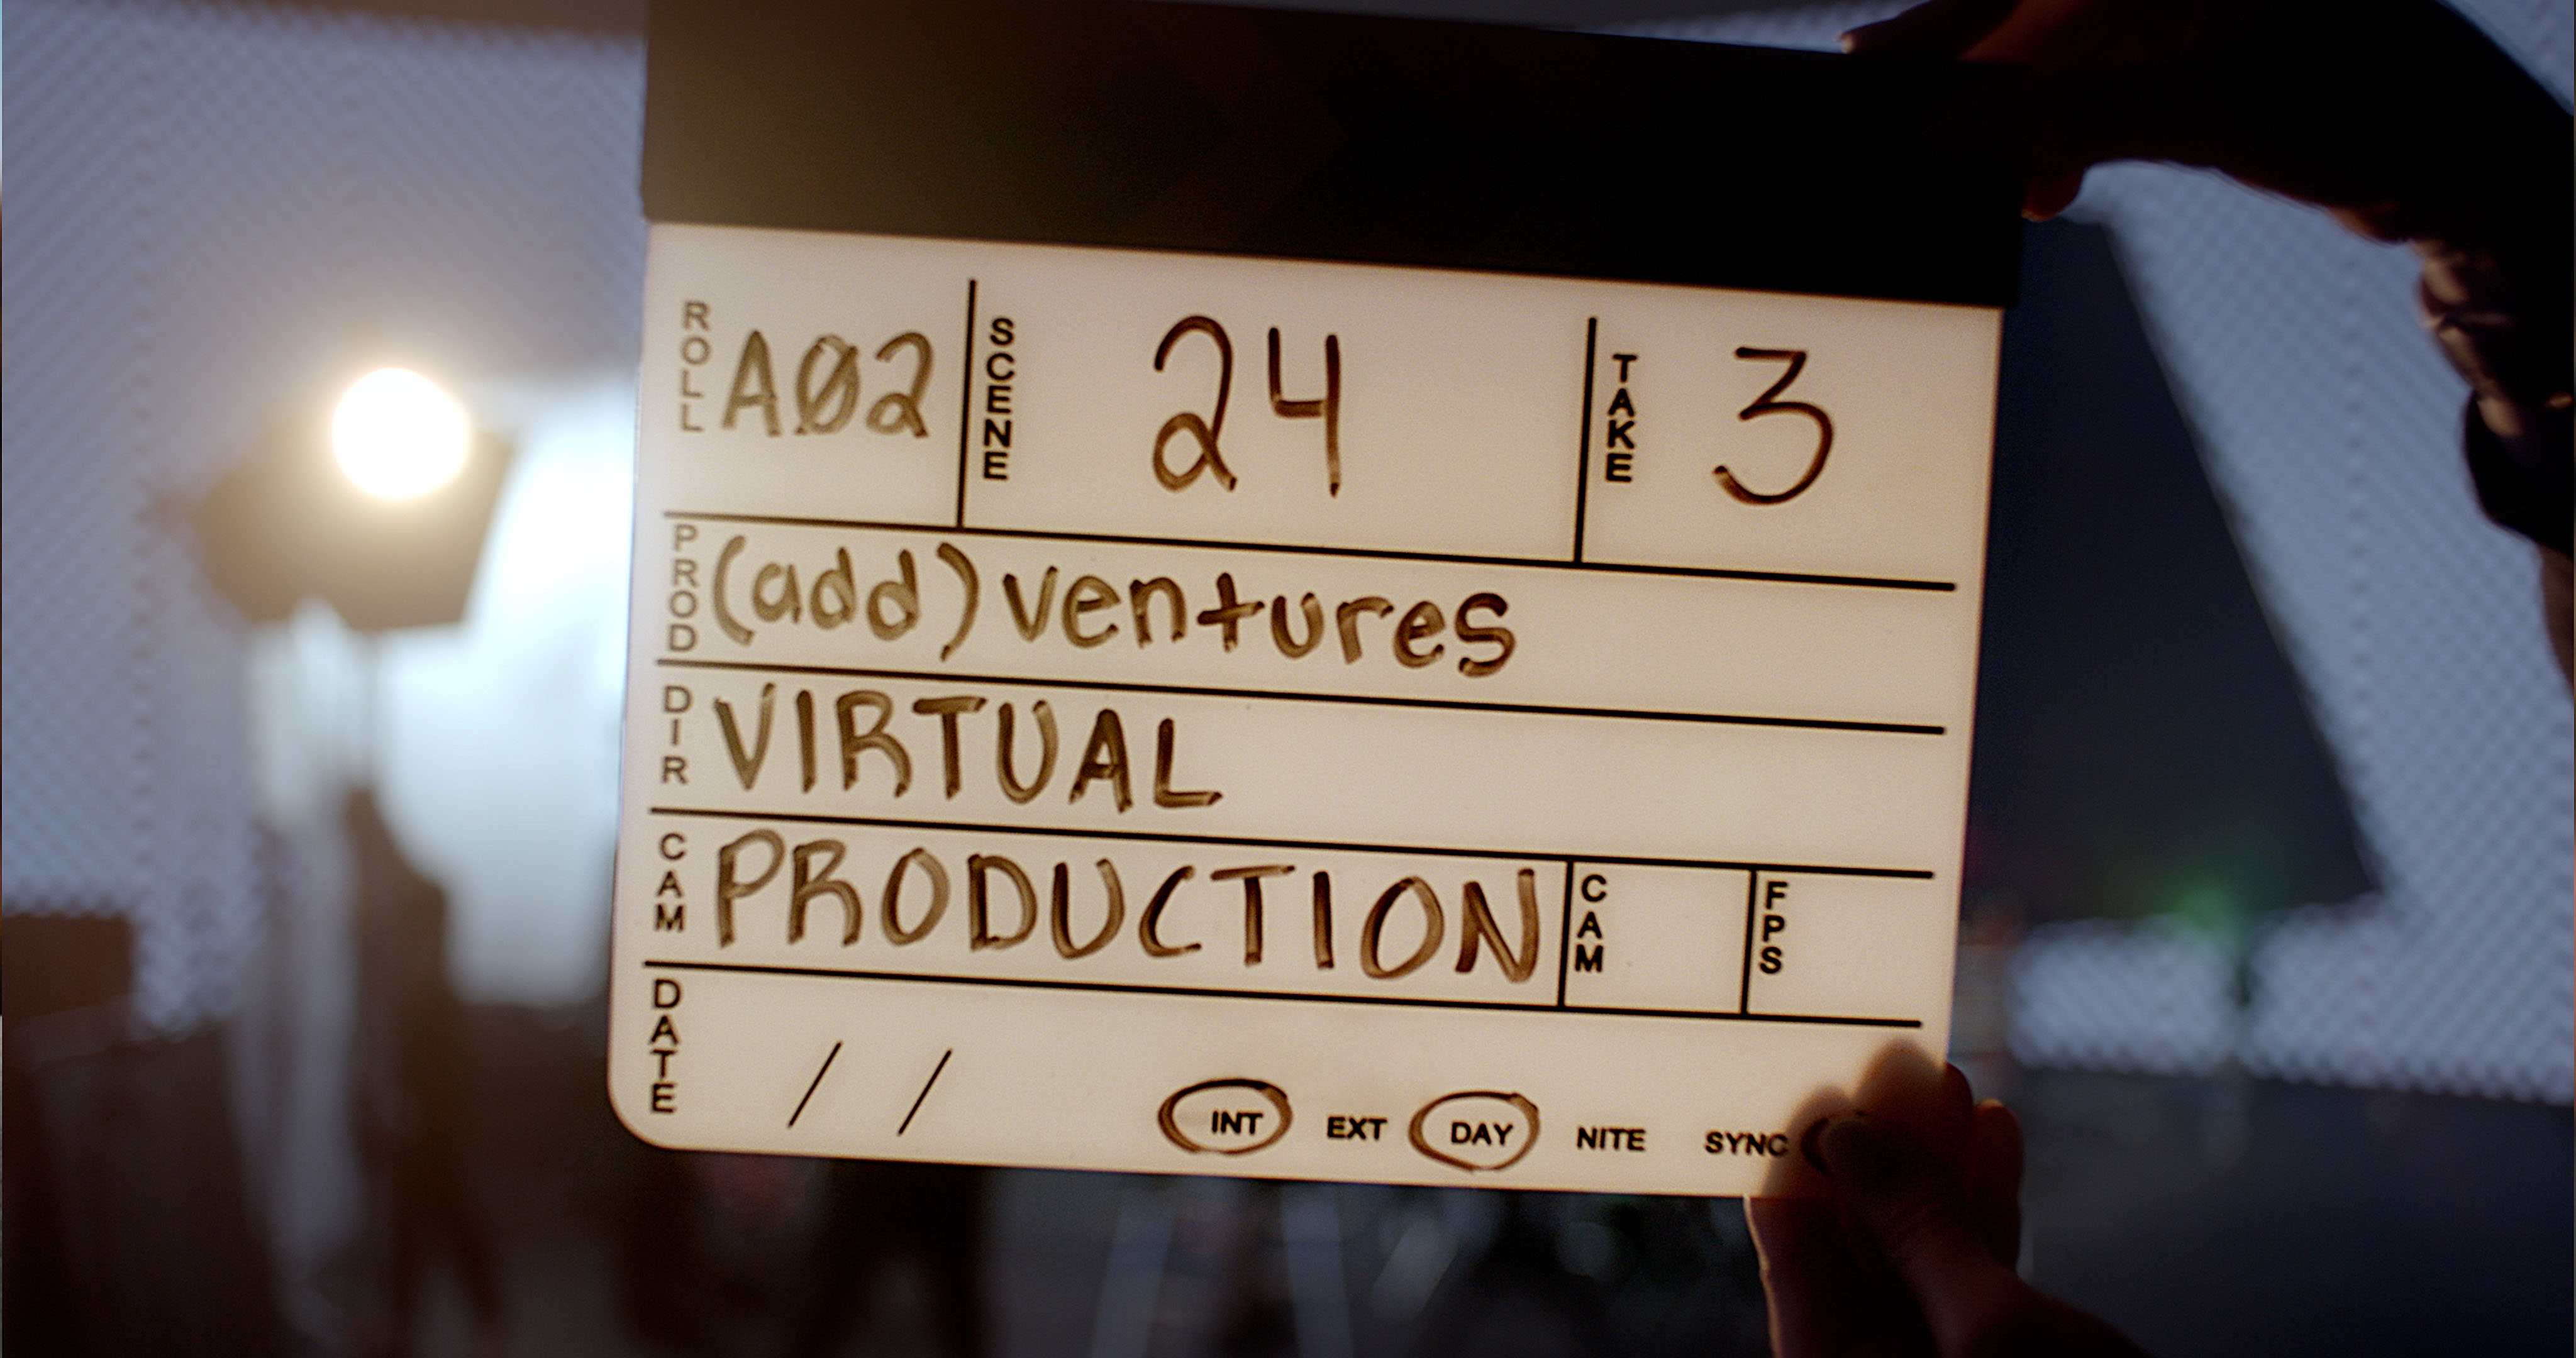 A video marker identifying (add)ventures VIRTUAL PRODUCTION